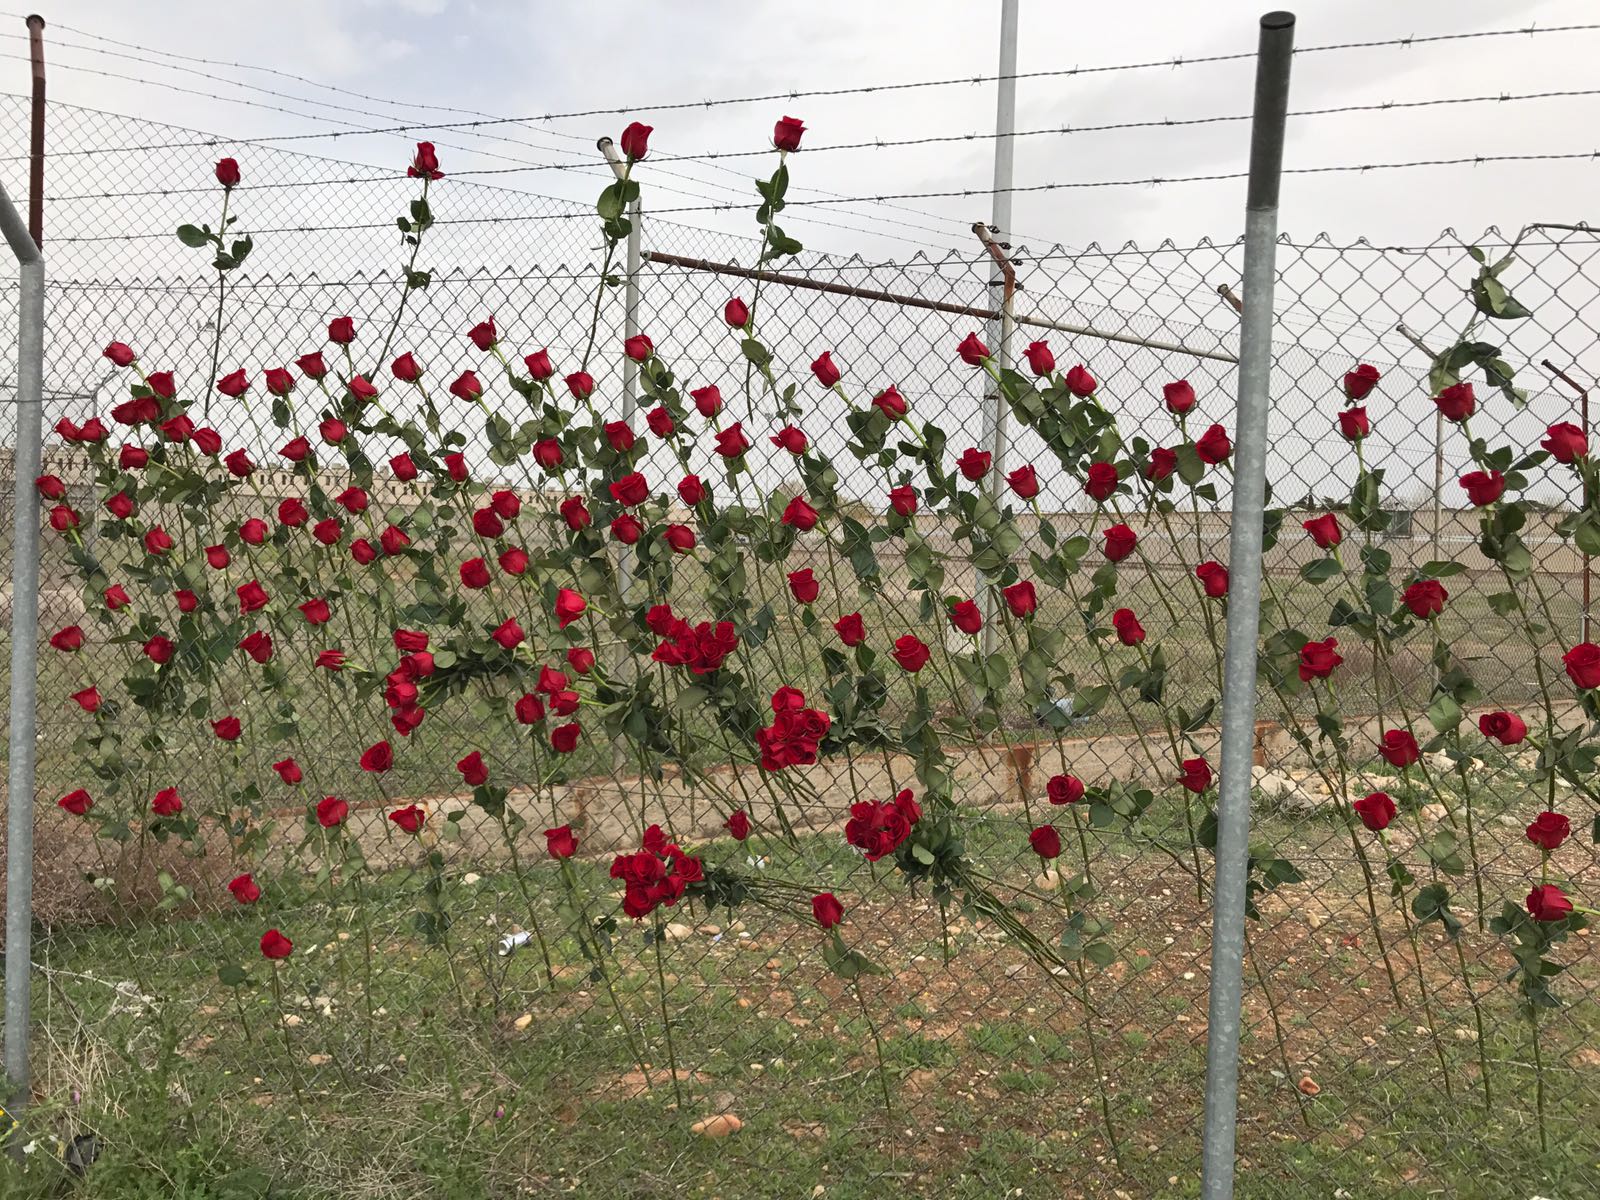 Pro-independence supporters leave roses in the fence of Alcalá Meco, the Madrid prison where Dolors Bassa and Carme Forcadell are imprisoned (by ACN)